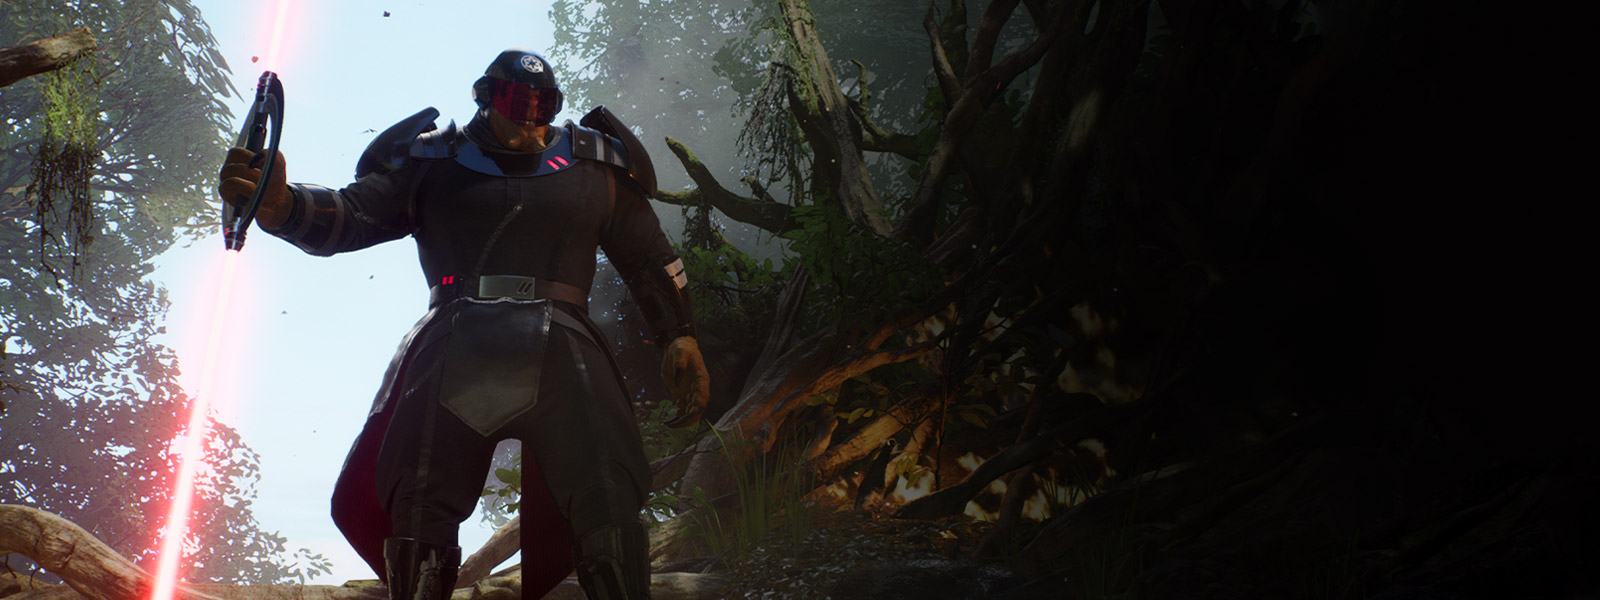 A large alien creature in Inquisitor armour holds a dual-sided lightsaber in a jungle